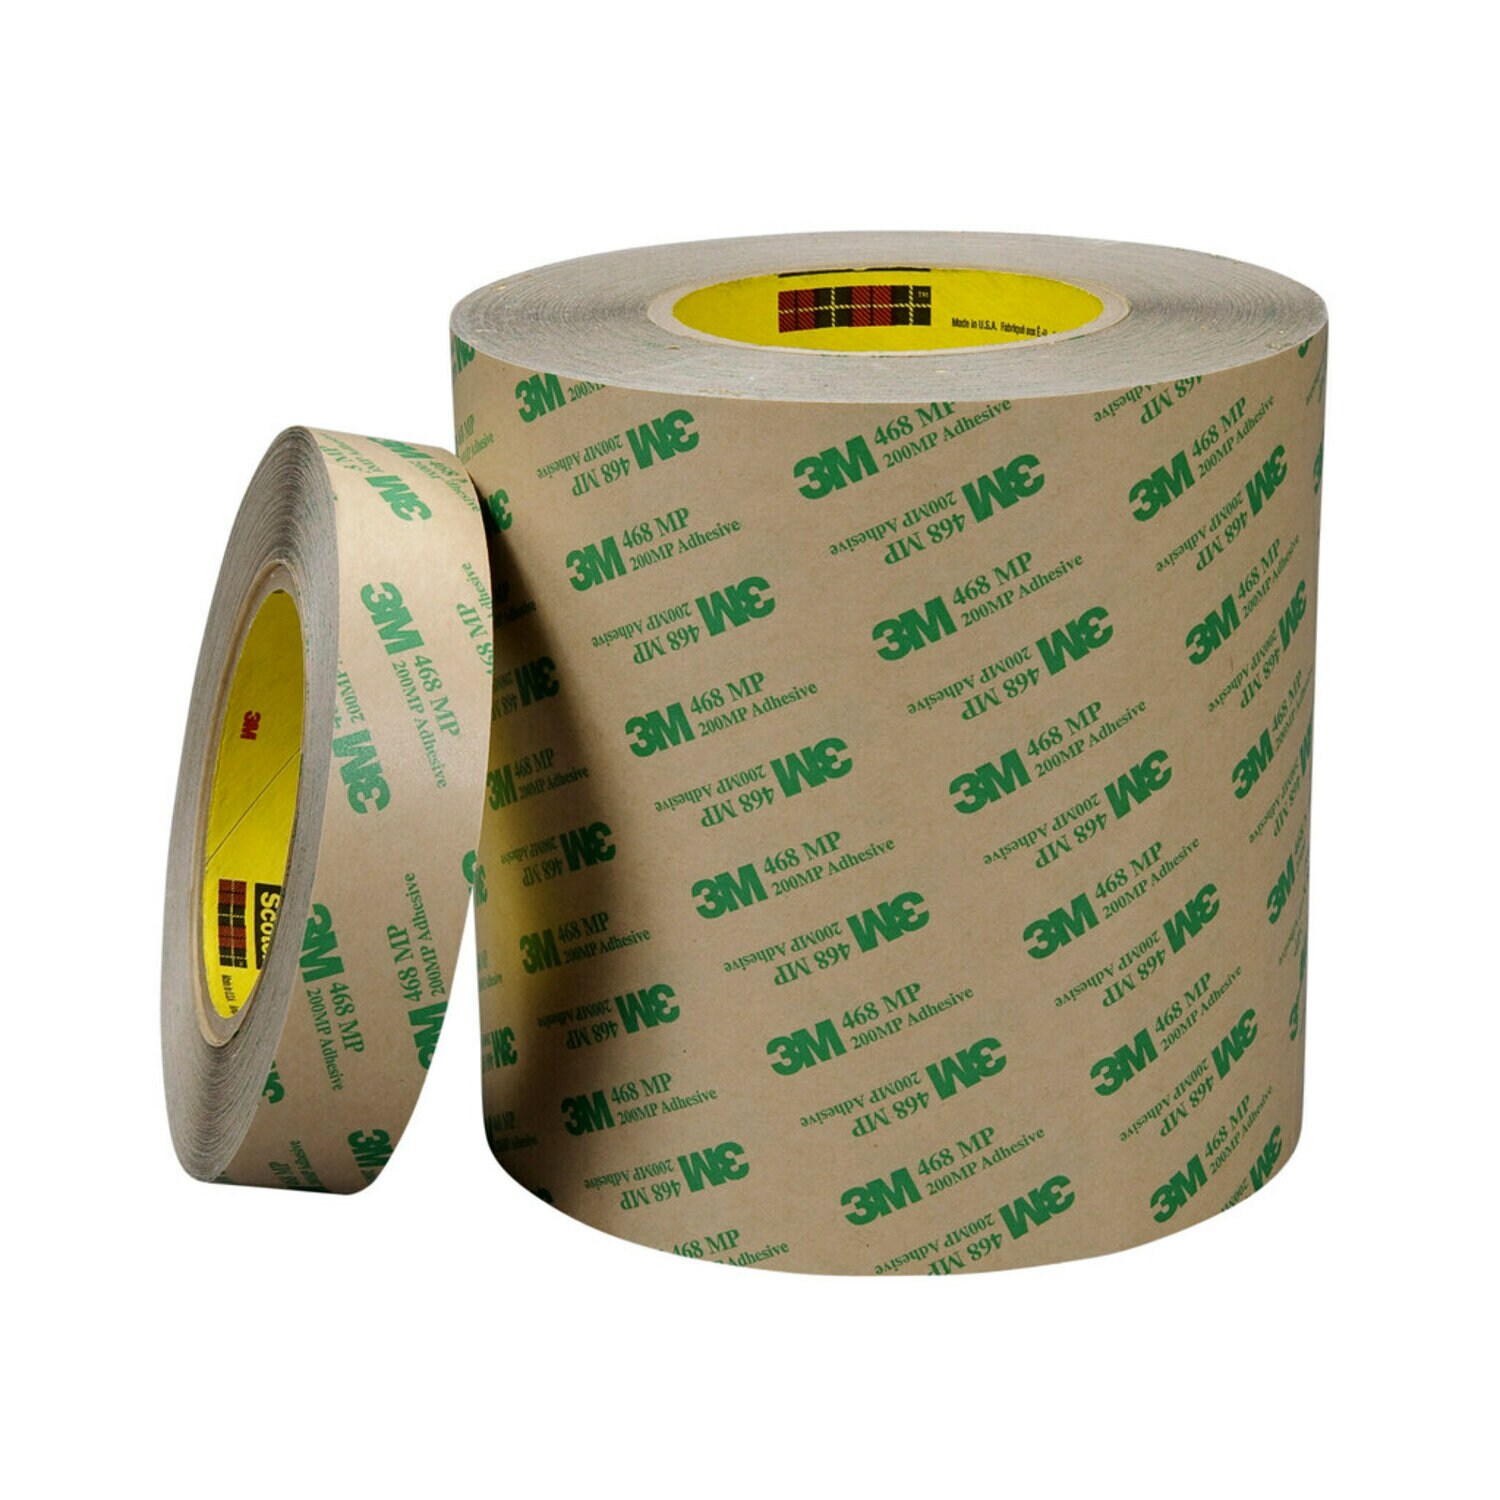 7000028918 - 3M Adhesive Transfer Tape 468MP, Clear, 48 in x 120 yd, 5 mil, 1 roll
per case